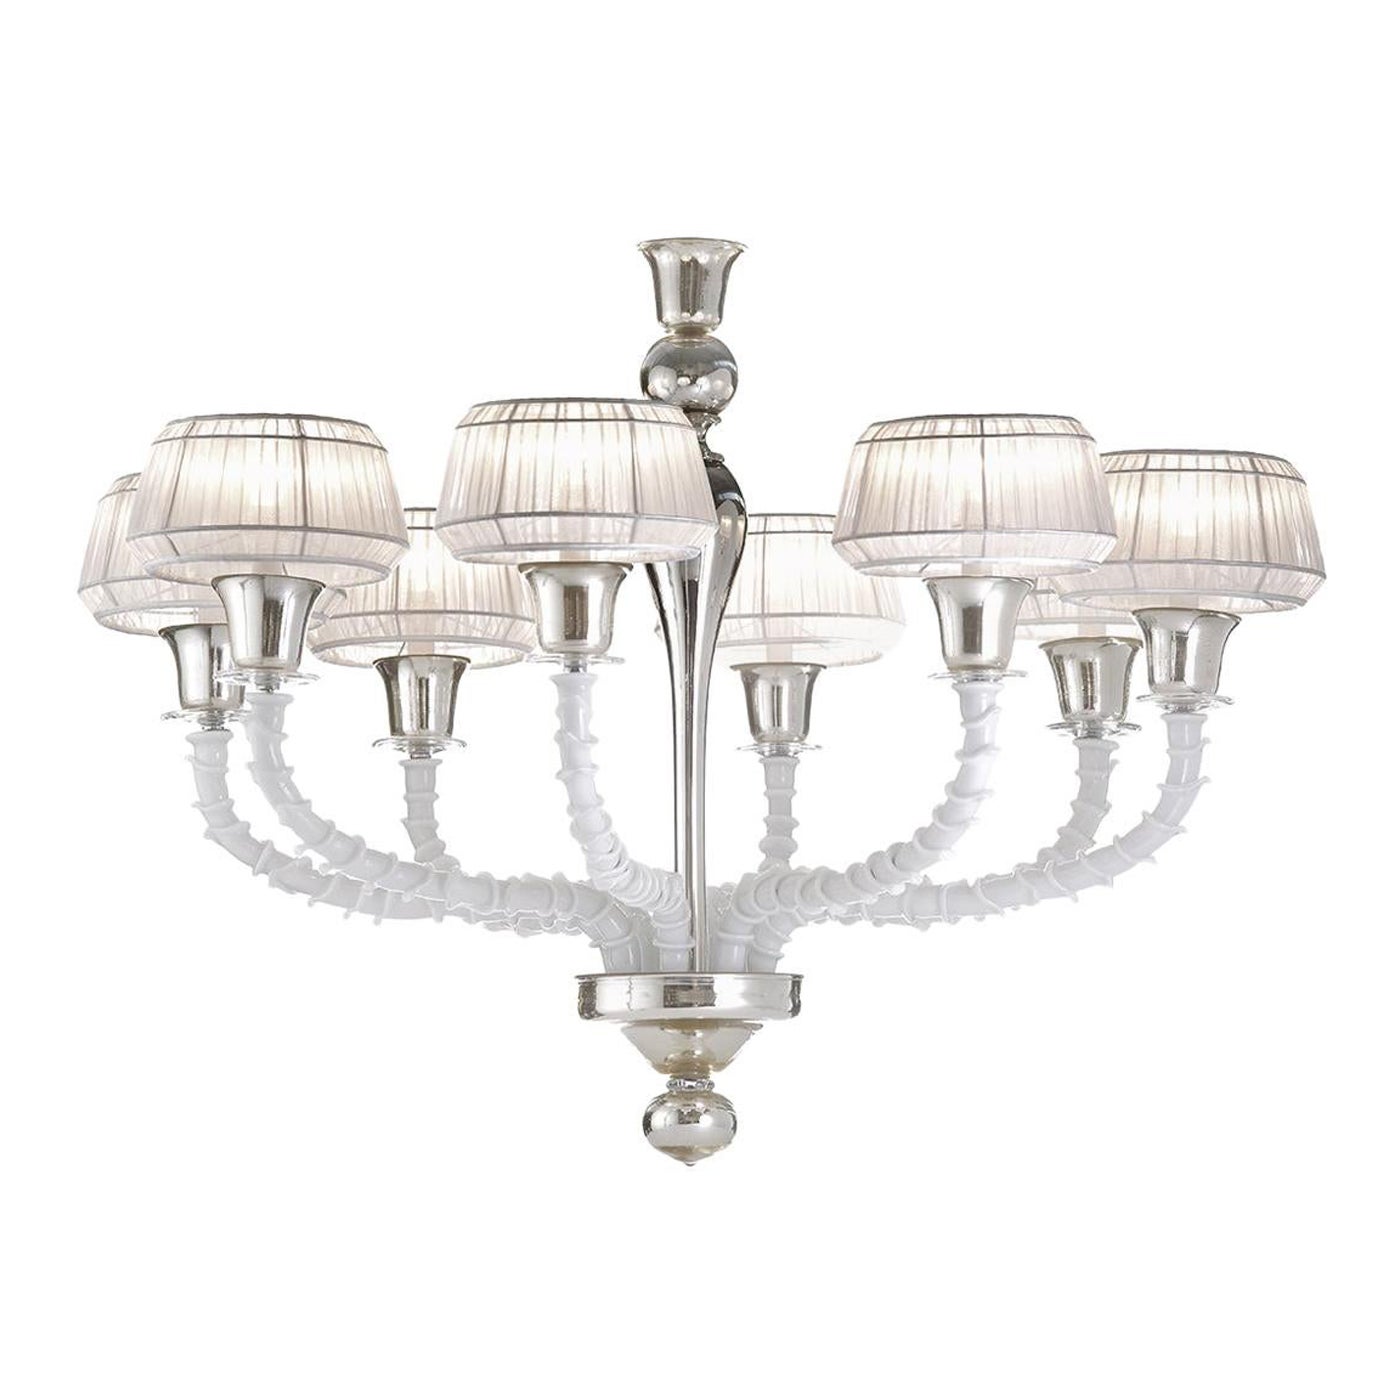 White and Silver Venetian Glass Chandelier For Sale